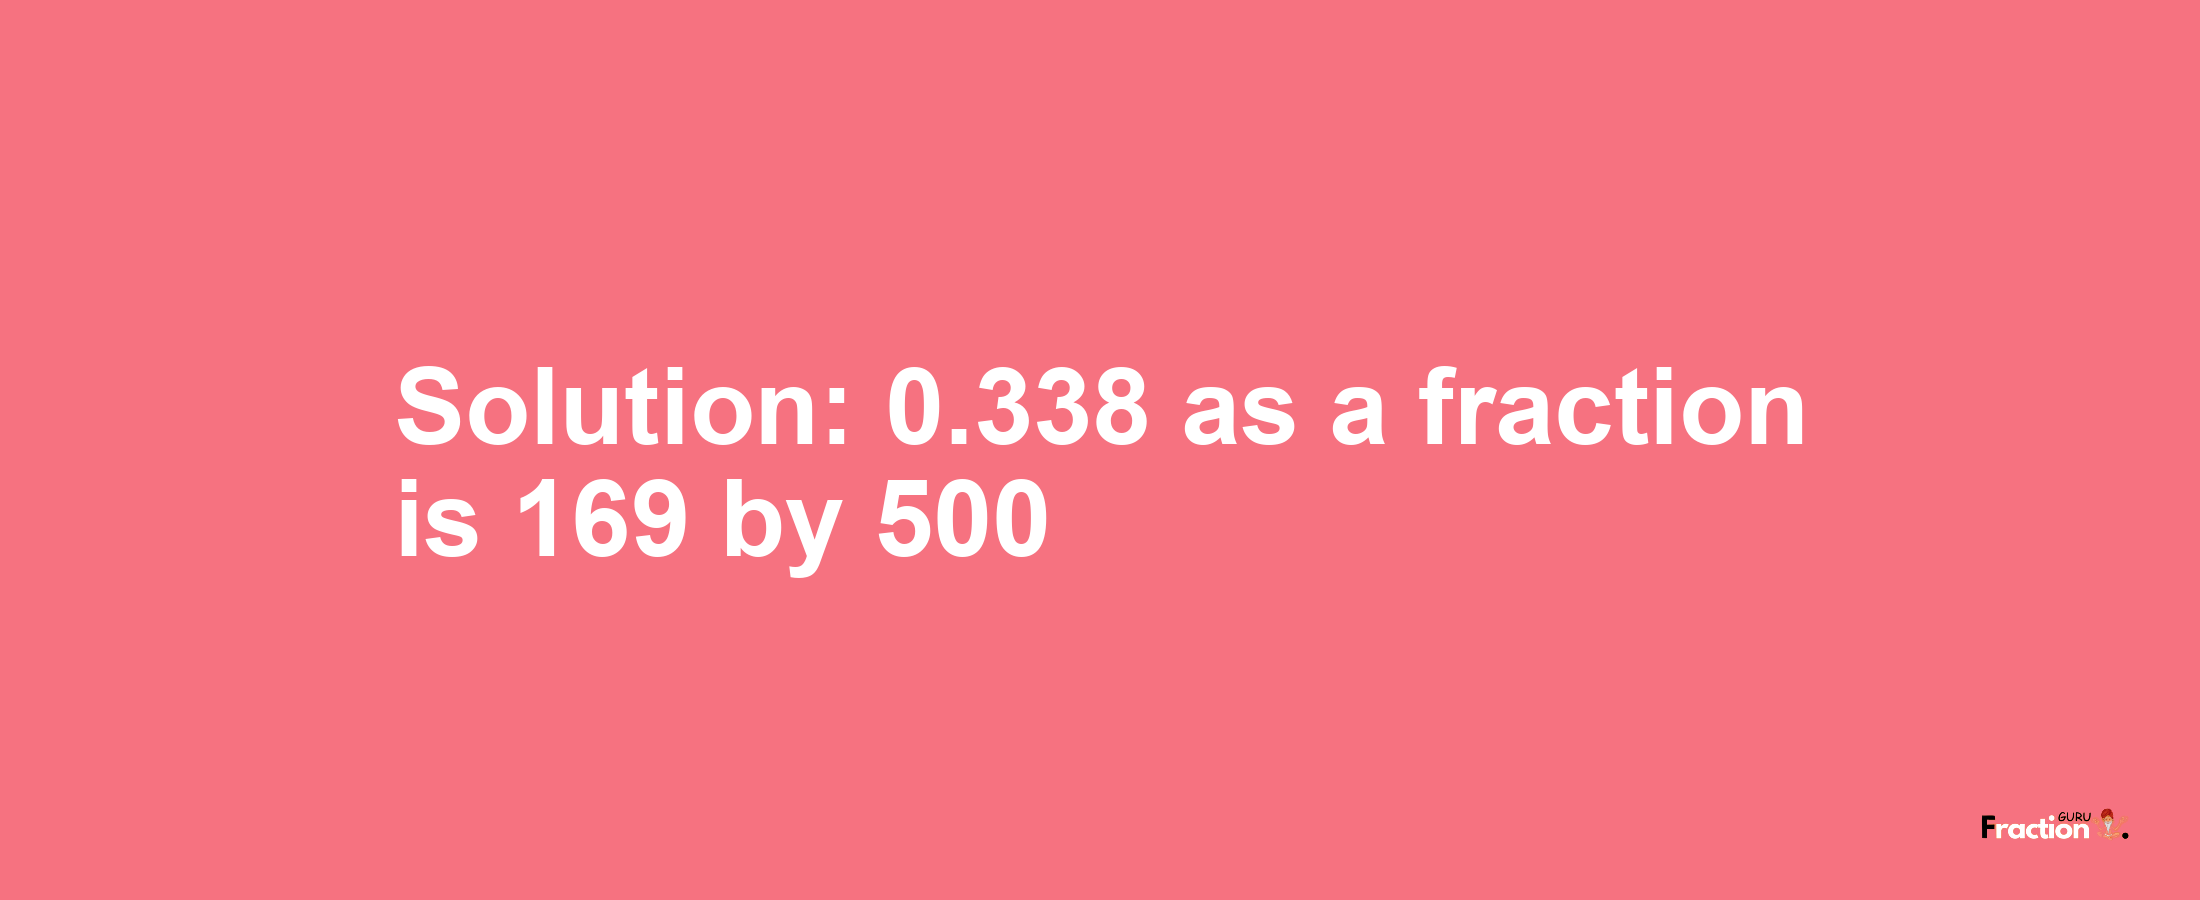 Solution:0.338 as a fraction is 169/500